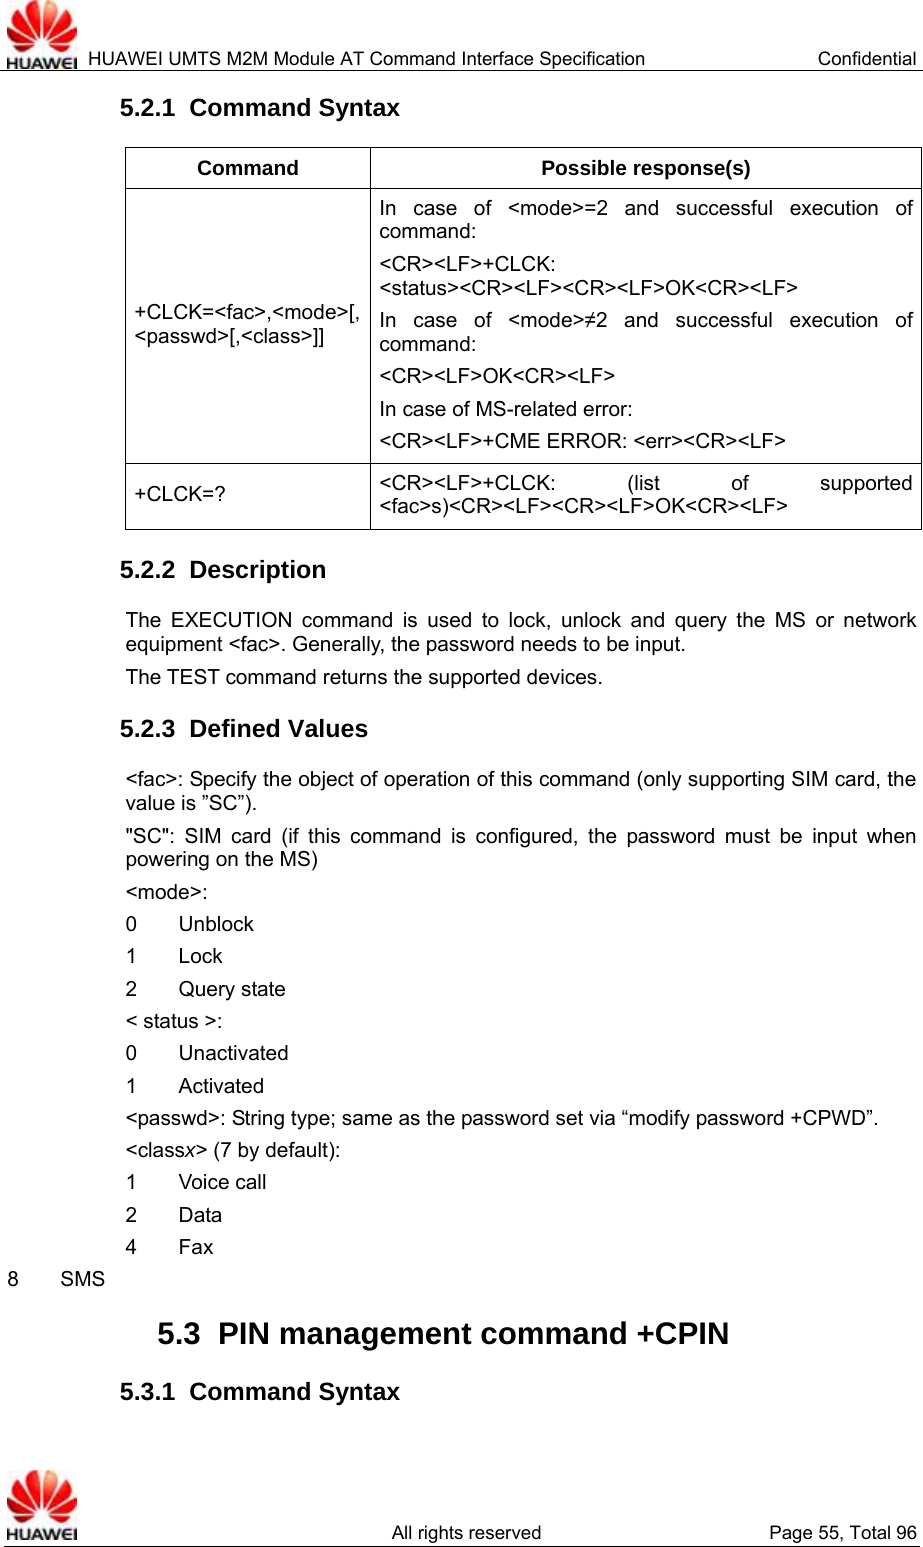  HUAWEI UMTS M2M Module AT Command Interface Specification  Confidential   All rights reserved  Page 55, Total 96 5.2.1  Command Syntax Command Possible response(s) +CLCK=&lt;fac&gt;,&lt;mode&gt;[,&lt;passwd&gt;[,&lt;class&gt;]] In case of &lt;mode&gt;=2 and successful execution of command:  &lt;CR&gt;&lt;LF&gt;+CLCK: &lt;status&gt;&lt;CR&gt;&lt;LF&gt;&lt;CR&gt;&lt;LF&gt;OK&lt;CR&gt;&lt;LF&gt; In case of &lt;mode&gt;≠2 and successful execution of command:  &lt;CR&gt;&lt;LF&gt;OK&lt;CR&gt;&lt;LF&gt; In case of MS-related error:   &lt;CR&gt;&lt;LF&gt;+CME ERROR: &lt;err&gt;&lt;CR&gt;&lt;LF&gt; +CLCK=?  &lt;CR&gt;&lt;LF&gt;+CLCK: (list of supported &lt;fac&gt;s)&lt;CR&gt;&lt;LF&gt;&lt;CR&gt;&lt;LF&gt;OK&lt;CR&gt;&lt;LF&gt; 5.2.2  Description The EXECUTION command is used to lock, unlock and query the MS or network equipment &lt;fac&gt;. Generally, the password needs to be input.   The TEST command returns the supported devices.   5.2.3  Defined Values &lt;fac&gt;: Specify the object of operation of this command (only supporting SIM card, the value is ”SC”).   &quot;SC&quot;: SIM card (if this command is configured, the password must be input when powering on the MS) &lt;mode&gt;: 0    Unblock 1    Lock 2    Query state &lt; status &gt;: 0    Unactivated 1    Activated &lt;passwd&gt;: String type; same as the password set via “modify password +CPWD”.   &lt;classx&gt; (7 by default): 1    Voice call 2    Data 4    Fax 8    SMS 5.3  PIN management command +CPIN 5.3.1  Command Syntax 